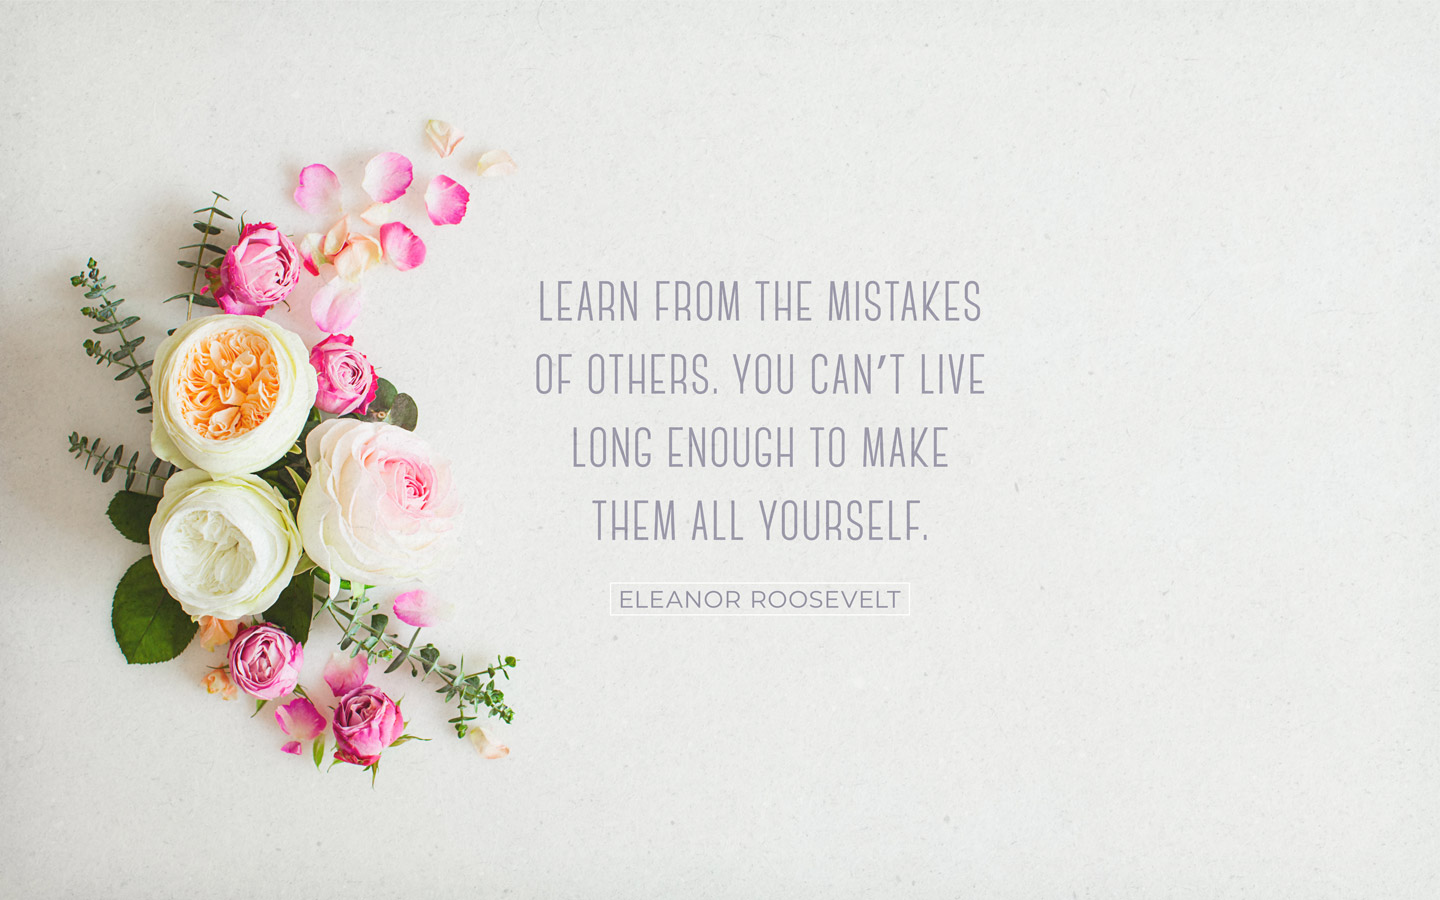 learn from the mistakes of others. you can’t live long enough to make them all yourself. eleanor roosevelt